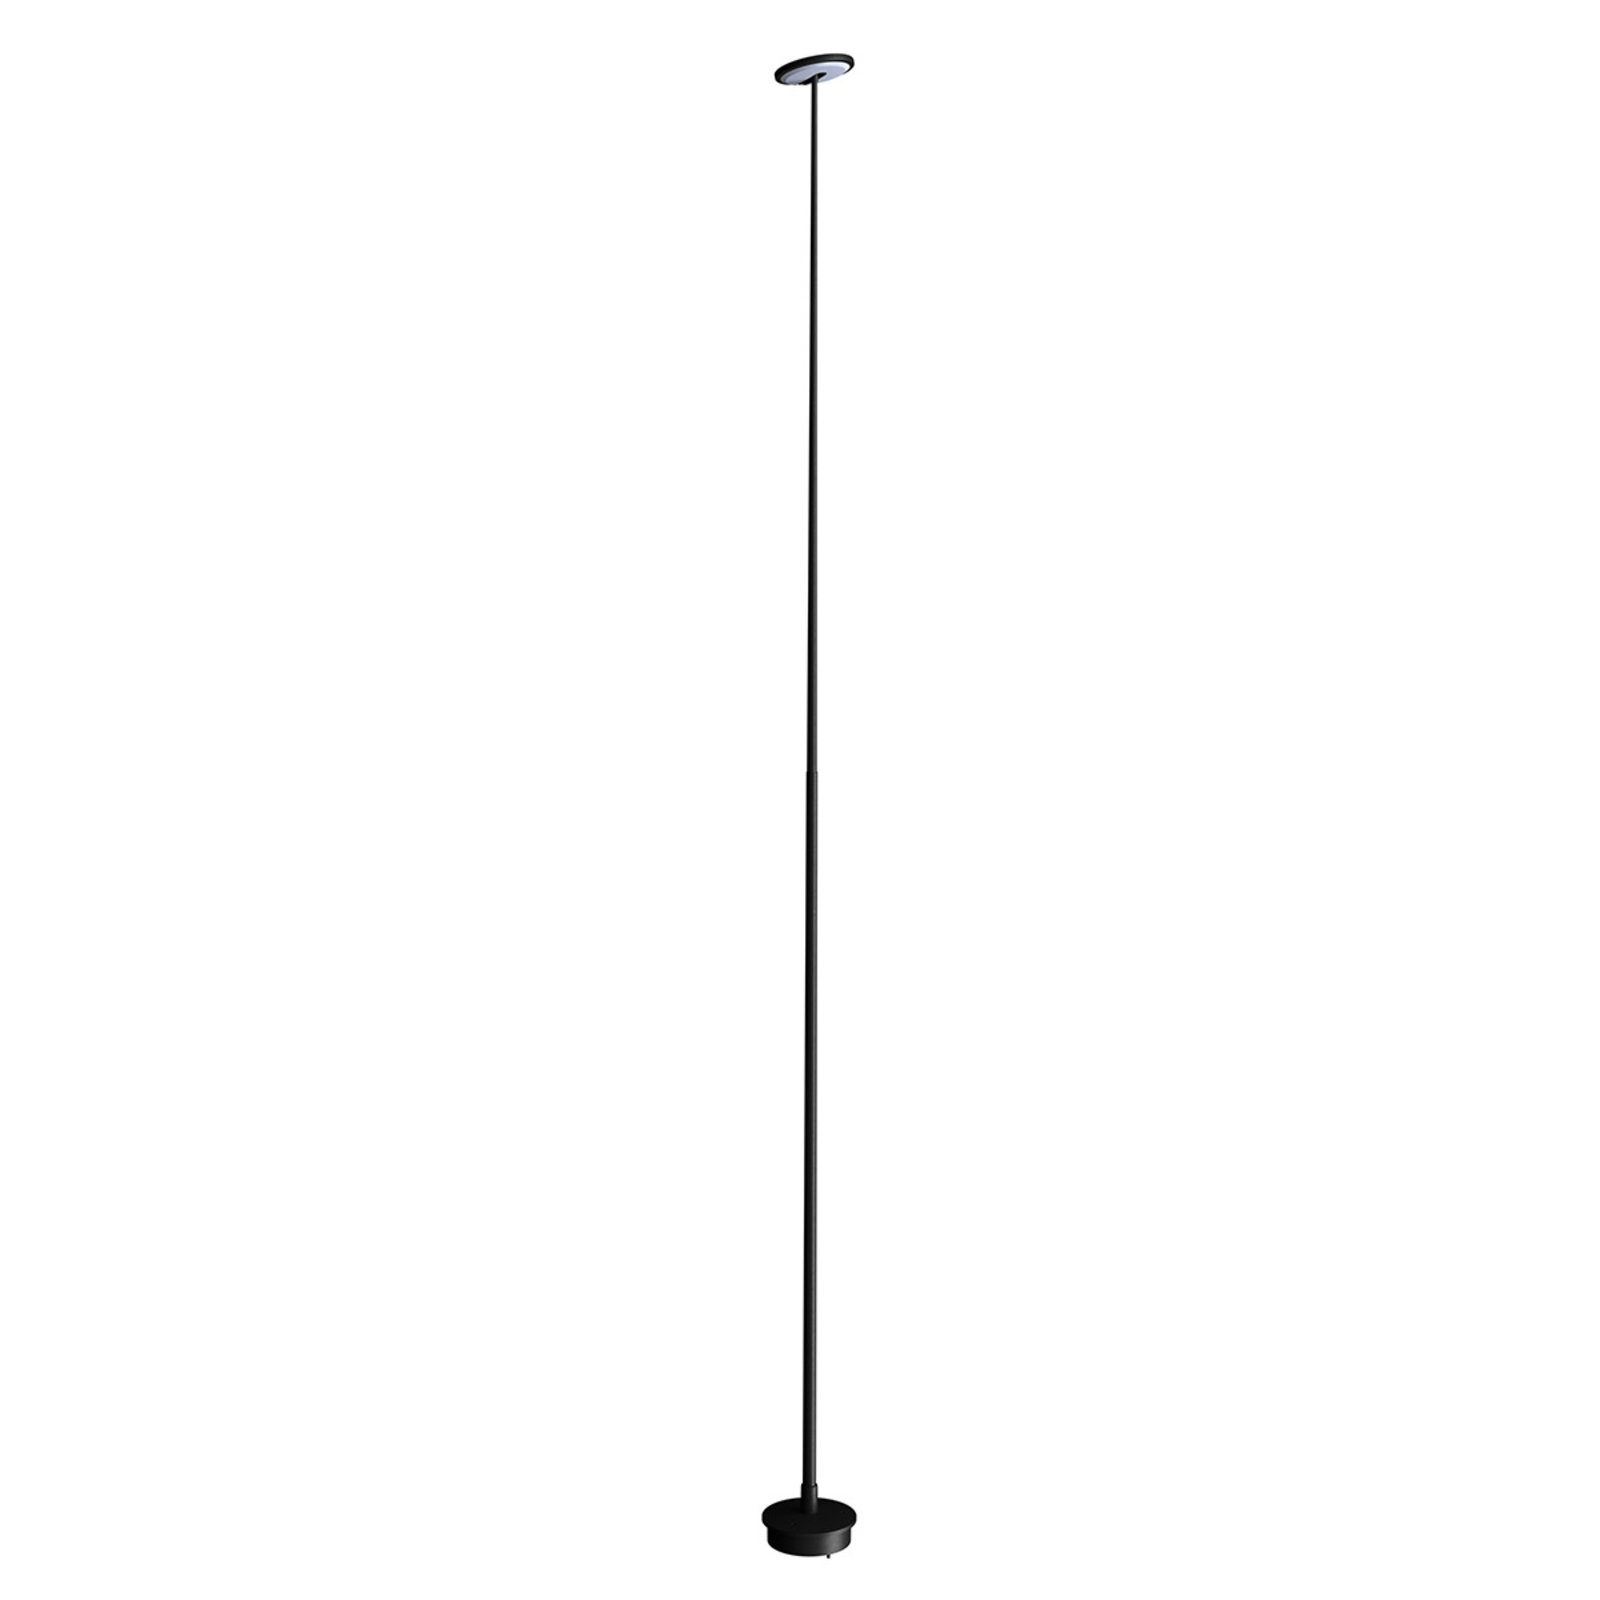 LED lamp post Invisible, IP54